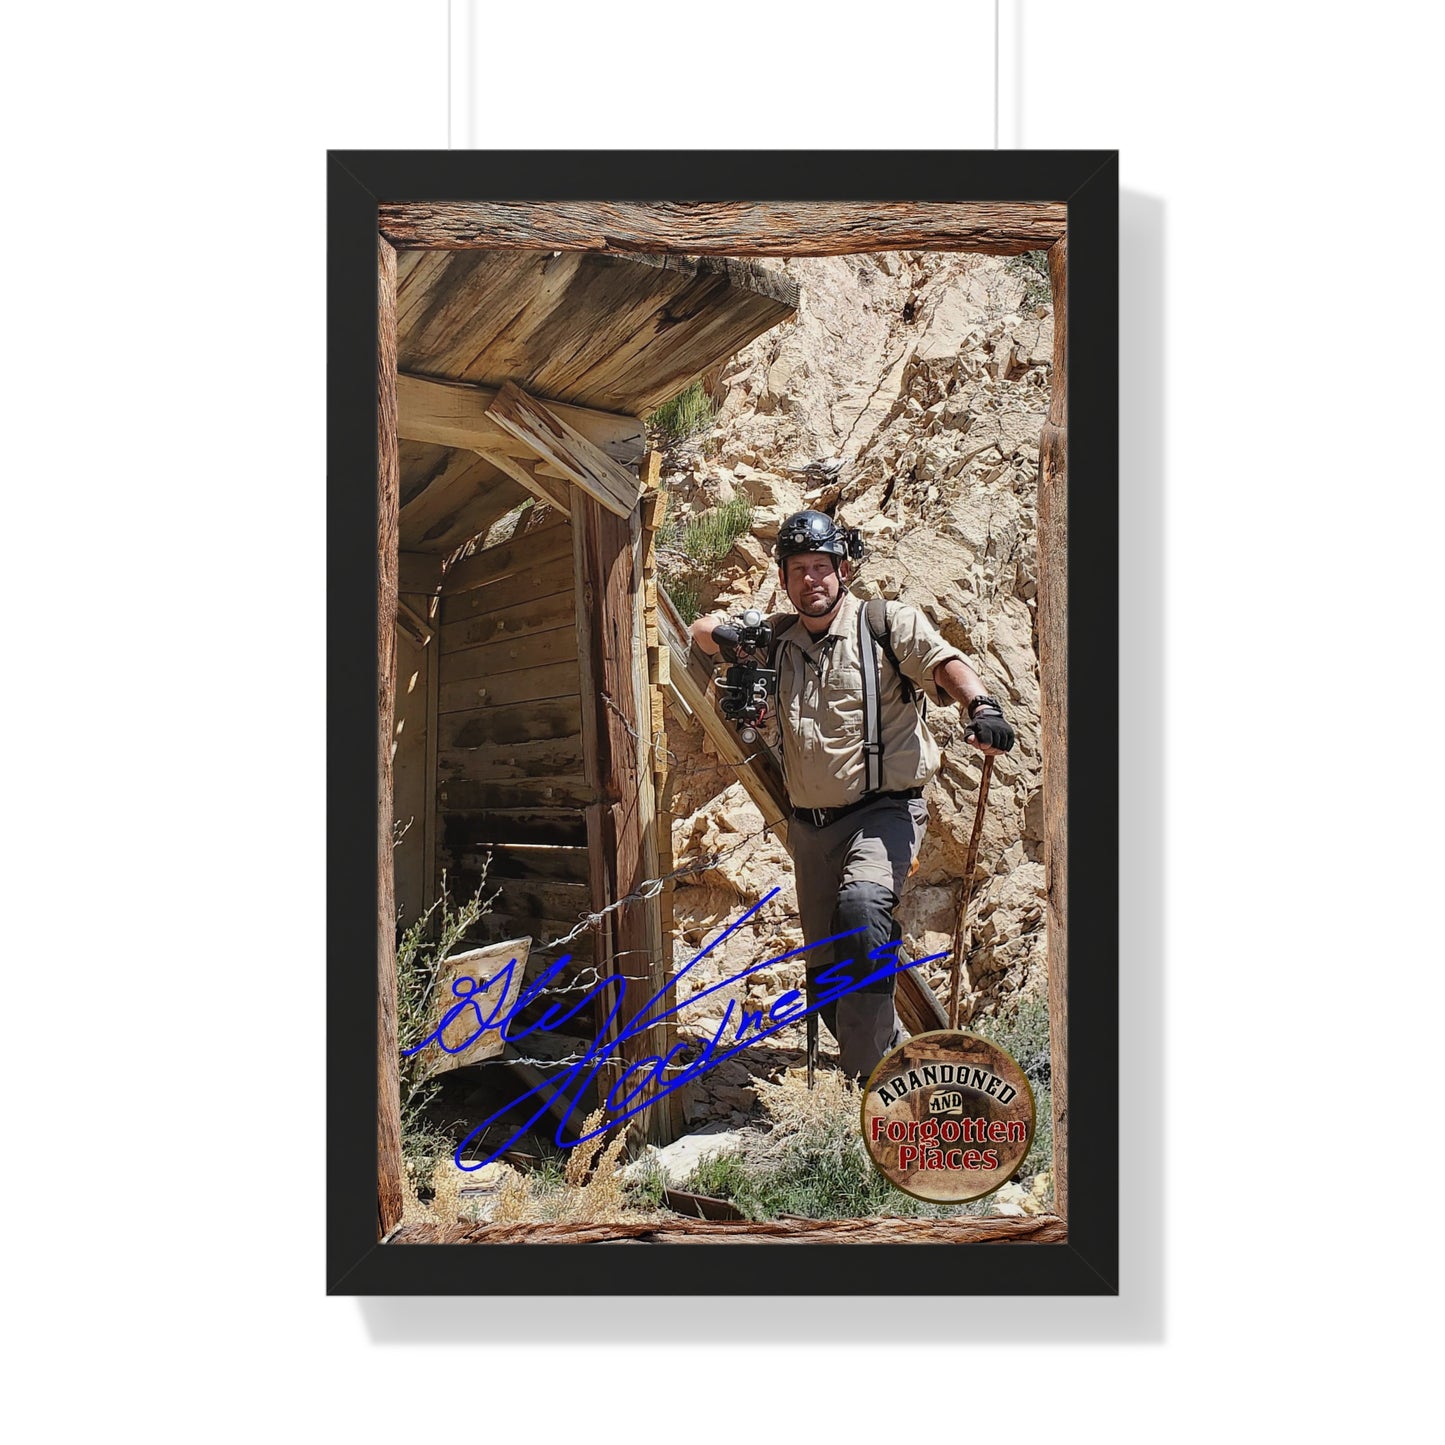 Gly Coolness Signature Collection, The Soaring Eagle Mine, Episode 54 (Framed)